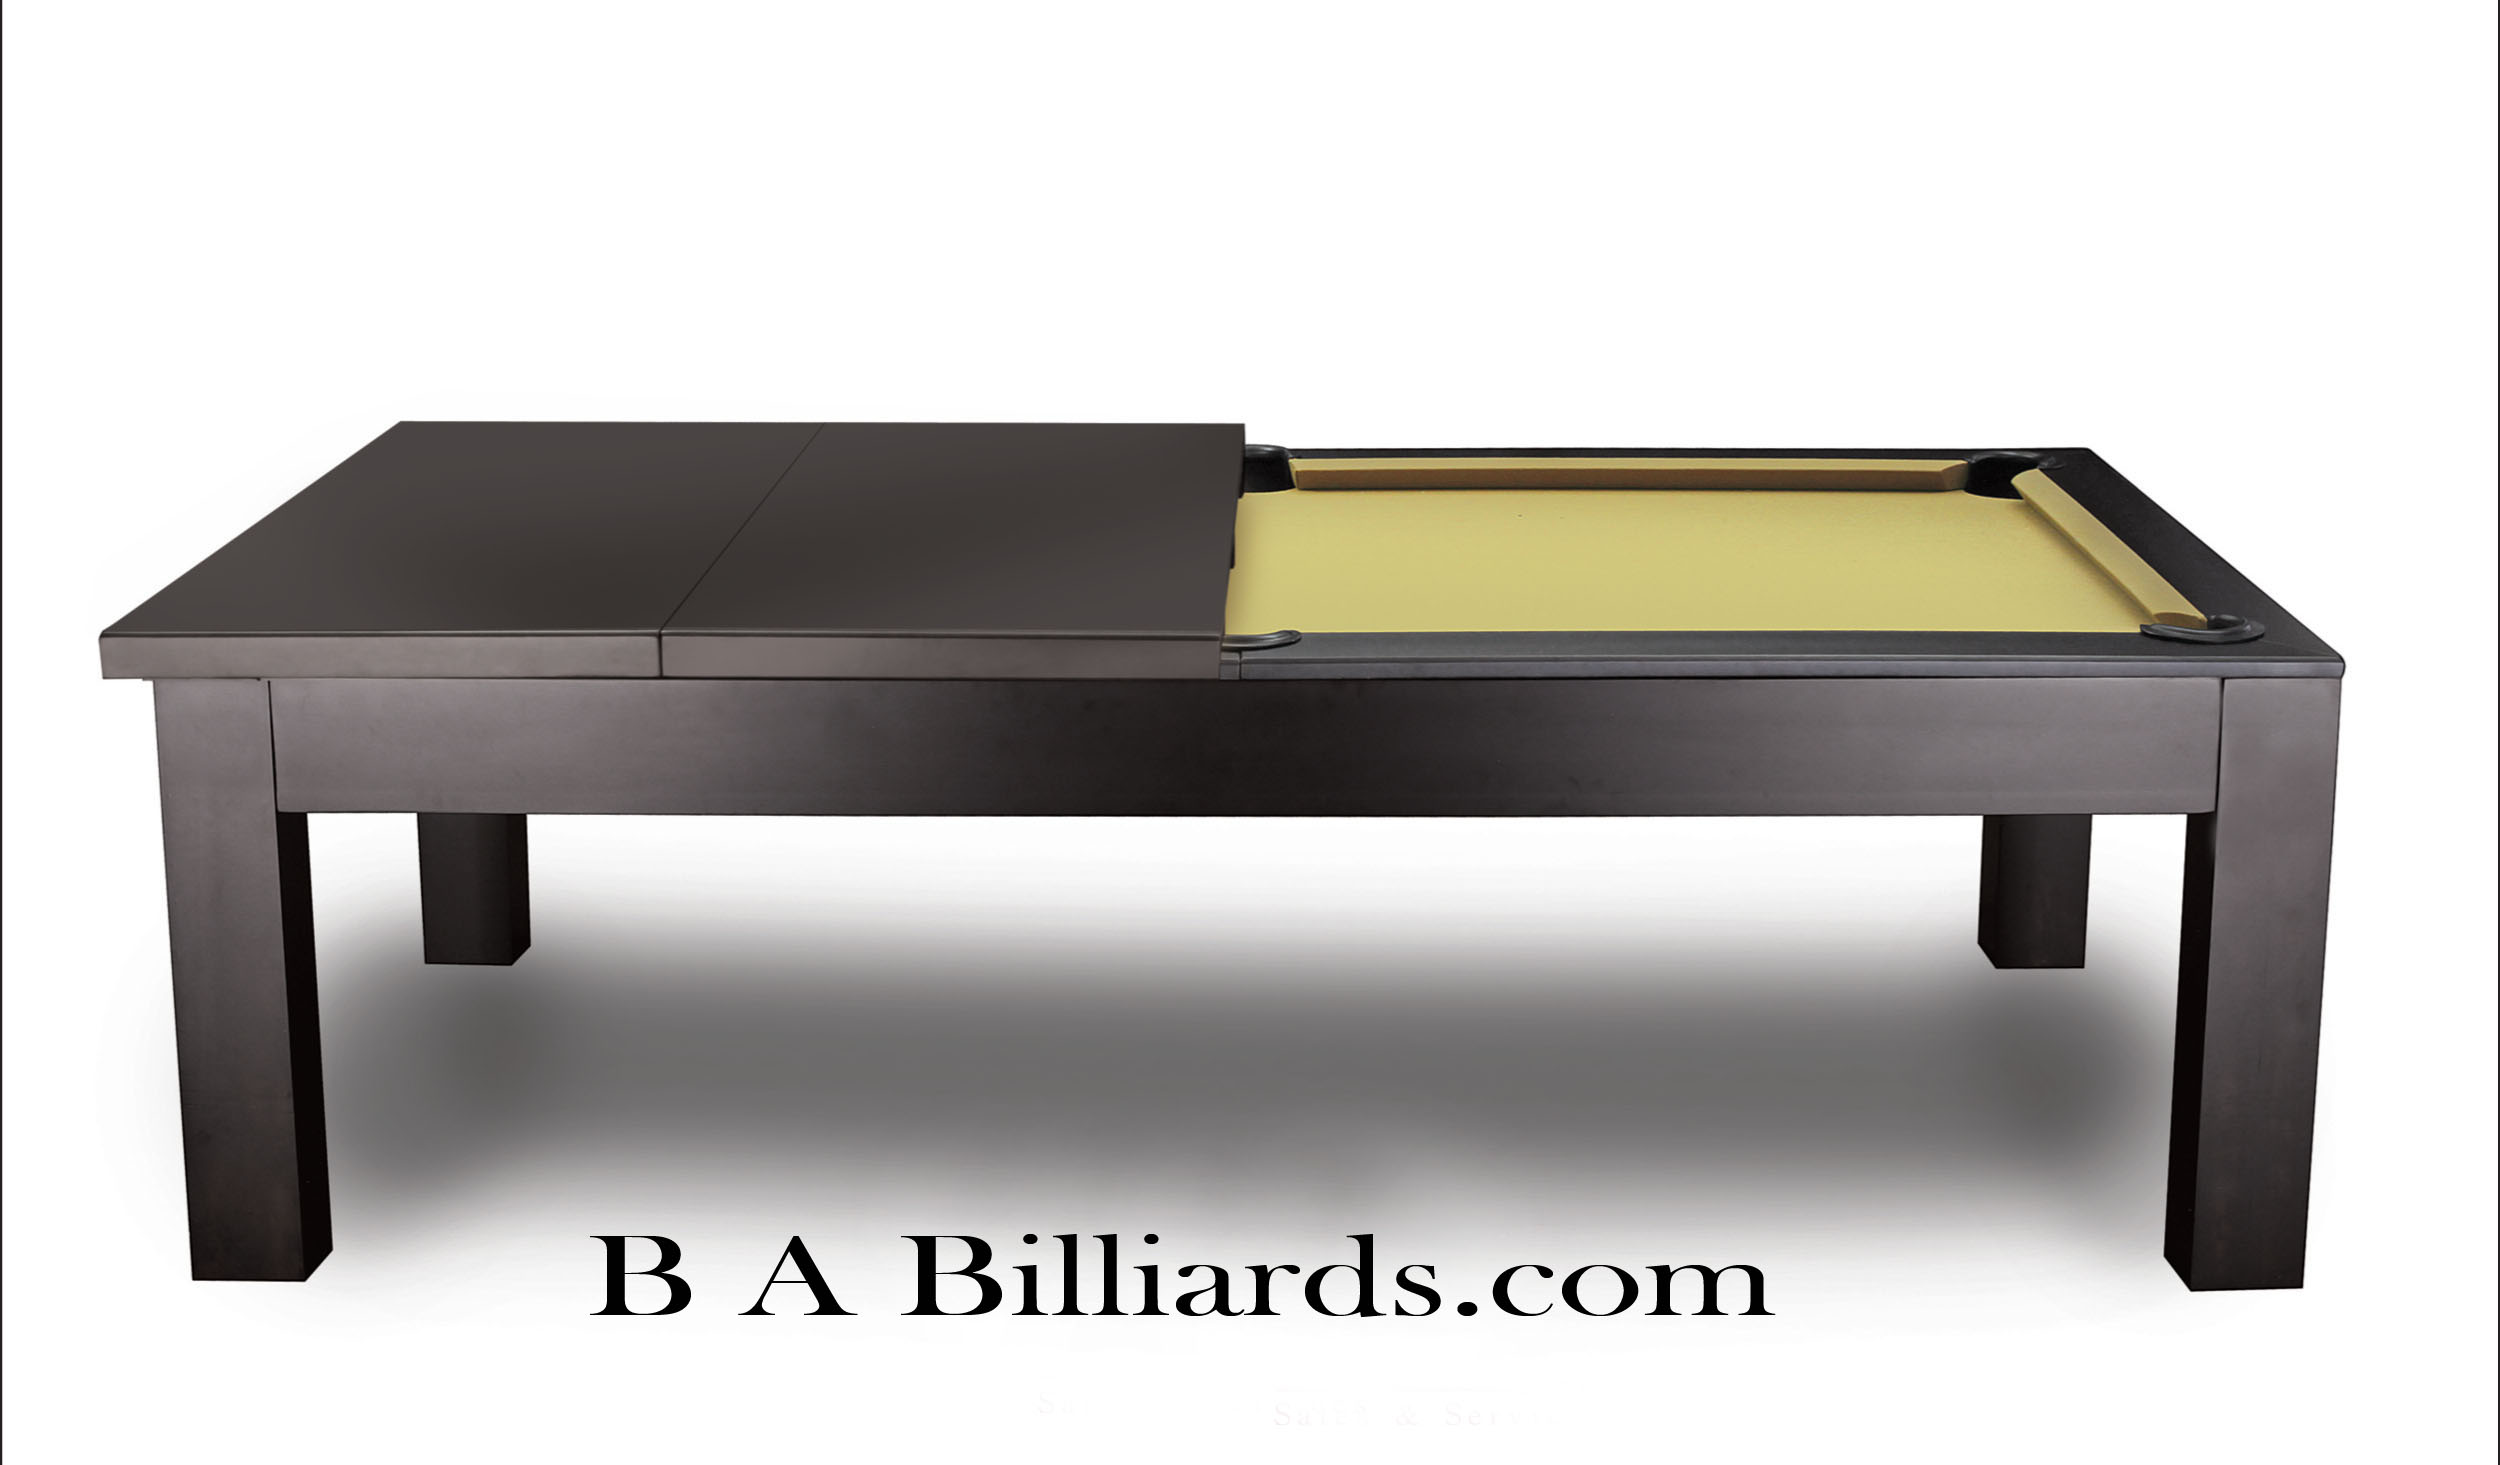  DELUXE POOL TABLES